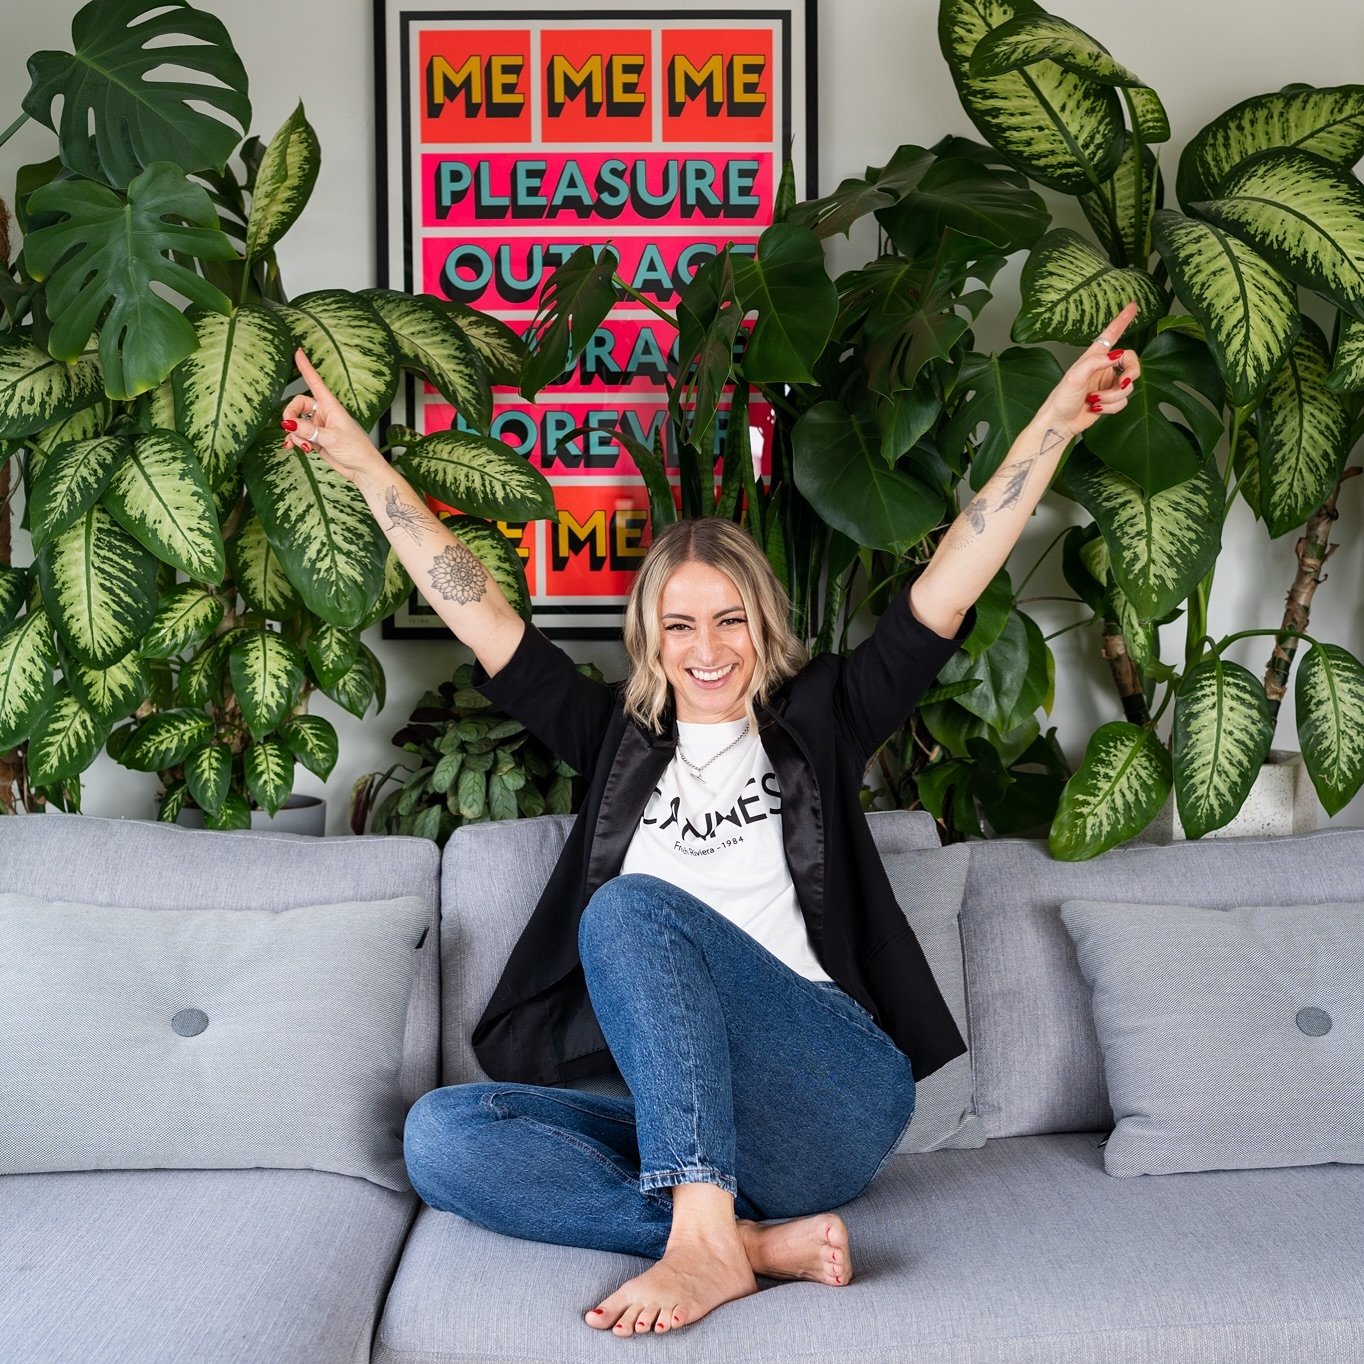 🙌 Woooop it&rsquo;s Friday! 🎉

Here&rsquo;s Michelle of @interior.self giving that end of wk energy on a recent Soulful Shoot. Check out her plants&hellip; they&rsquo;re what dreams are made of!! 💚🌵🌱

#happyfriday #soulfulphotography #brandshoot